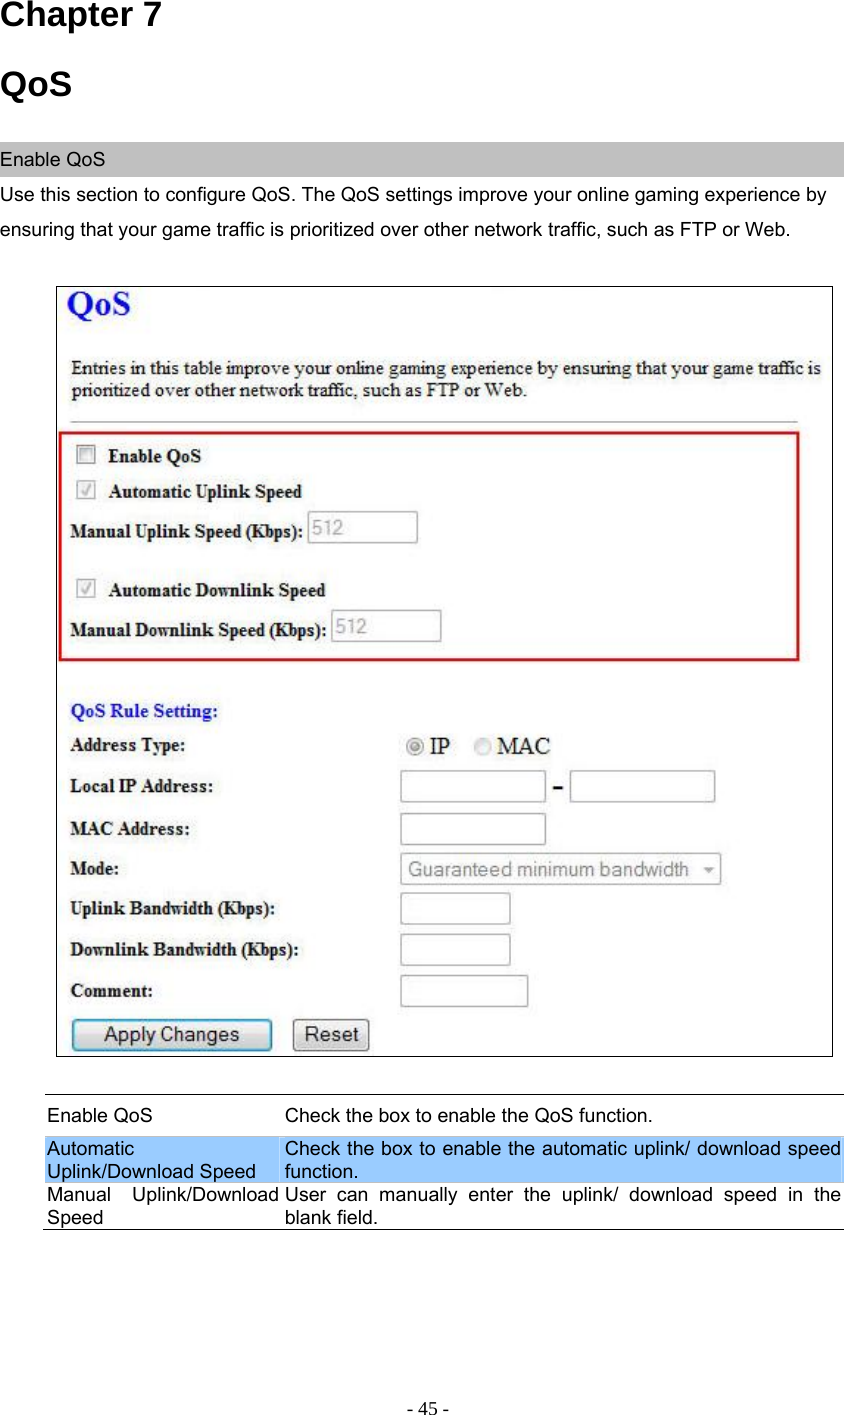 - 45 - Chapter 7 QoS  Enable QoS Use this section to configure QoS. The QoS settings improve your online gaming experience by ensuring that your game traffic is prioritized over other network traffic, such as FTP or Web.     Enable QoS  Check the box to enable the QoS function. Automatic Uplink/Download Speed Check the box to enable the automatic uplink/ download speed function. Manual Uplink/Download Speed User can manually enter the uplink/ download speed in the blank field.    